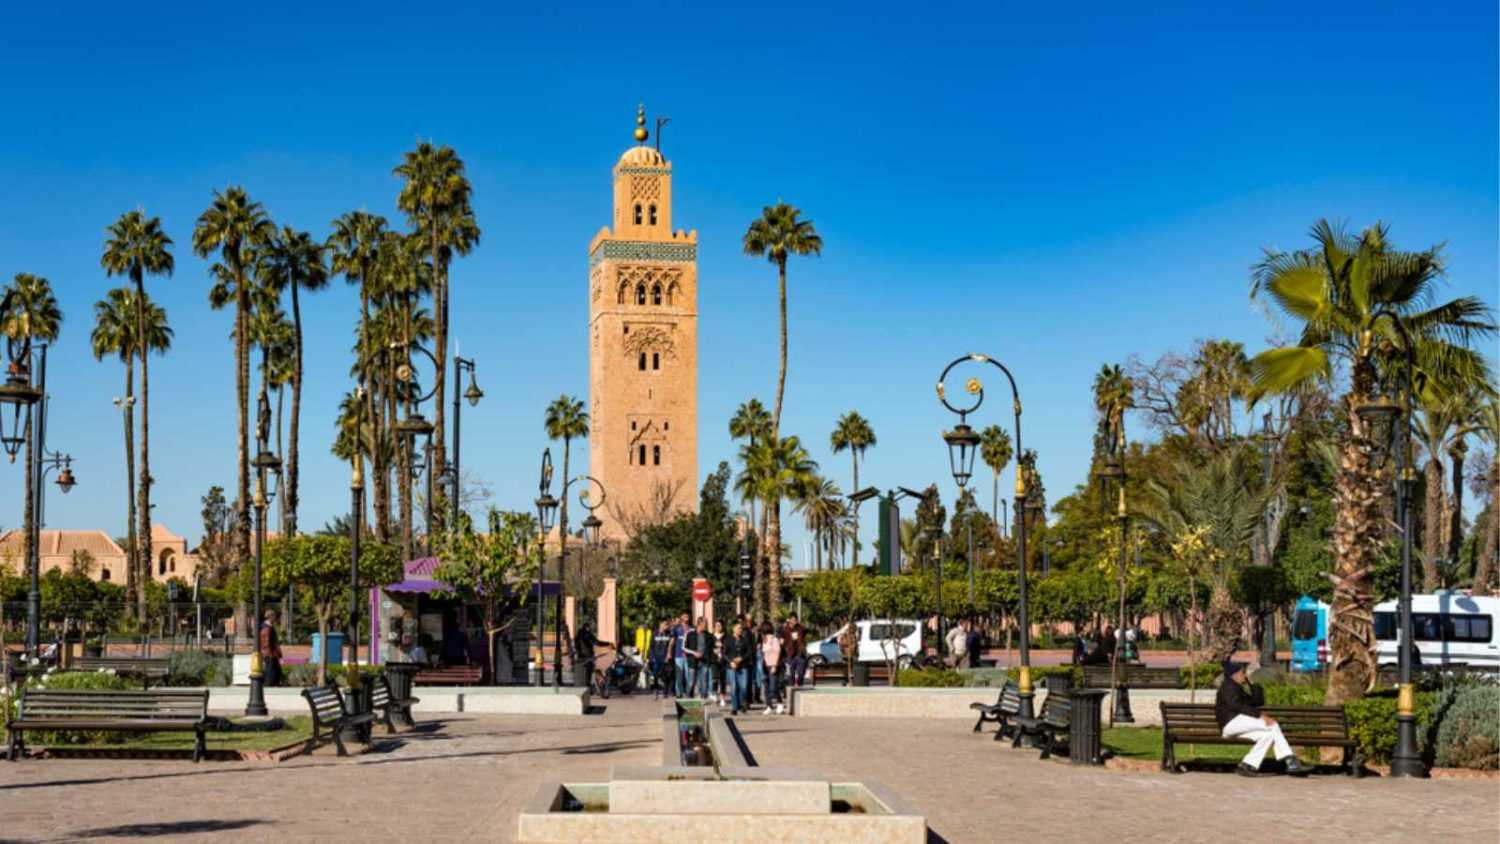 MARRAKESH, MOROCCO - JUNE 3, 2013: The Koutoubia Mosque in Marrakesh, Moroccomonument, religion, historic, culture, ancient, landmark, travel, building, architecture, africa, african culture, arabic,